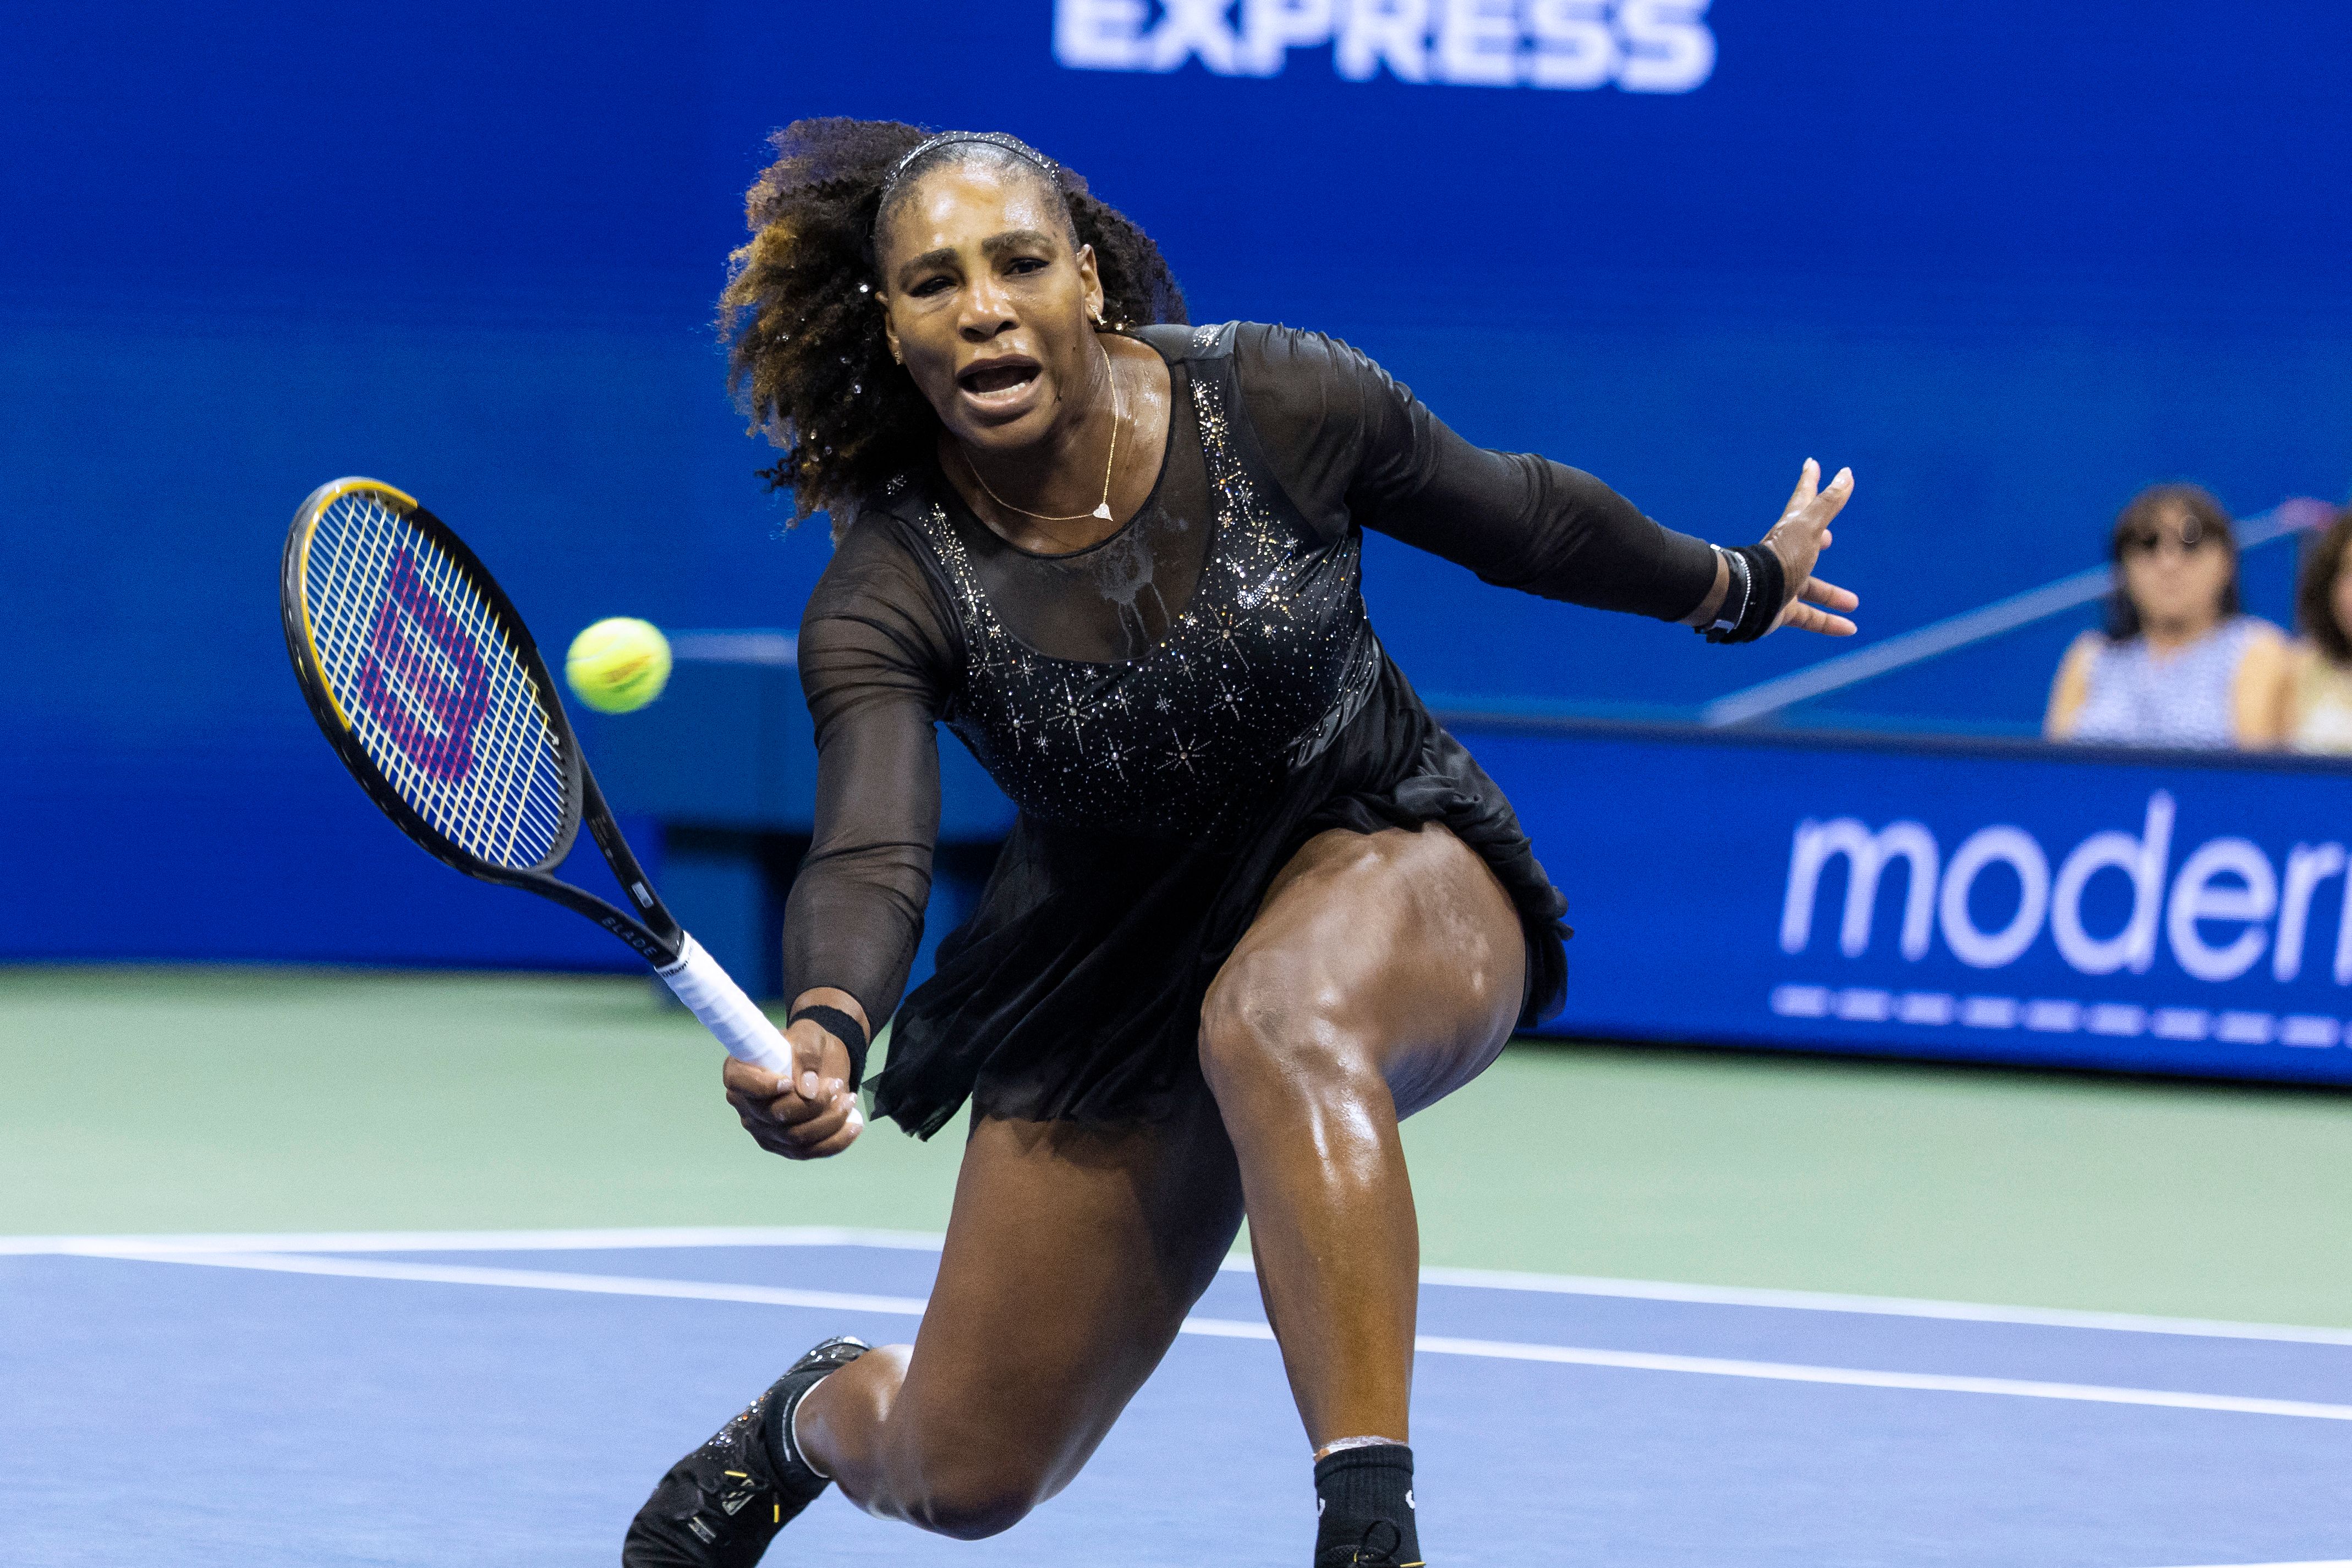 Serena Williams didnt pull off a miracle in her final act, but she found out she was “still Serena”